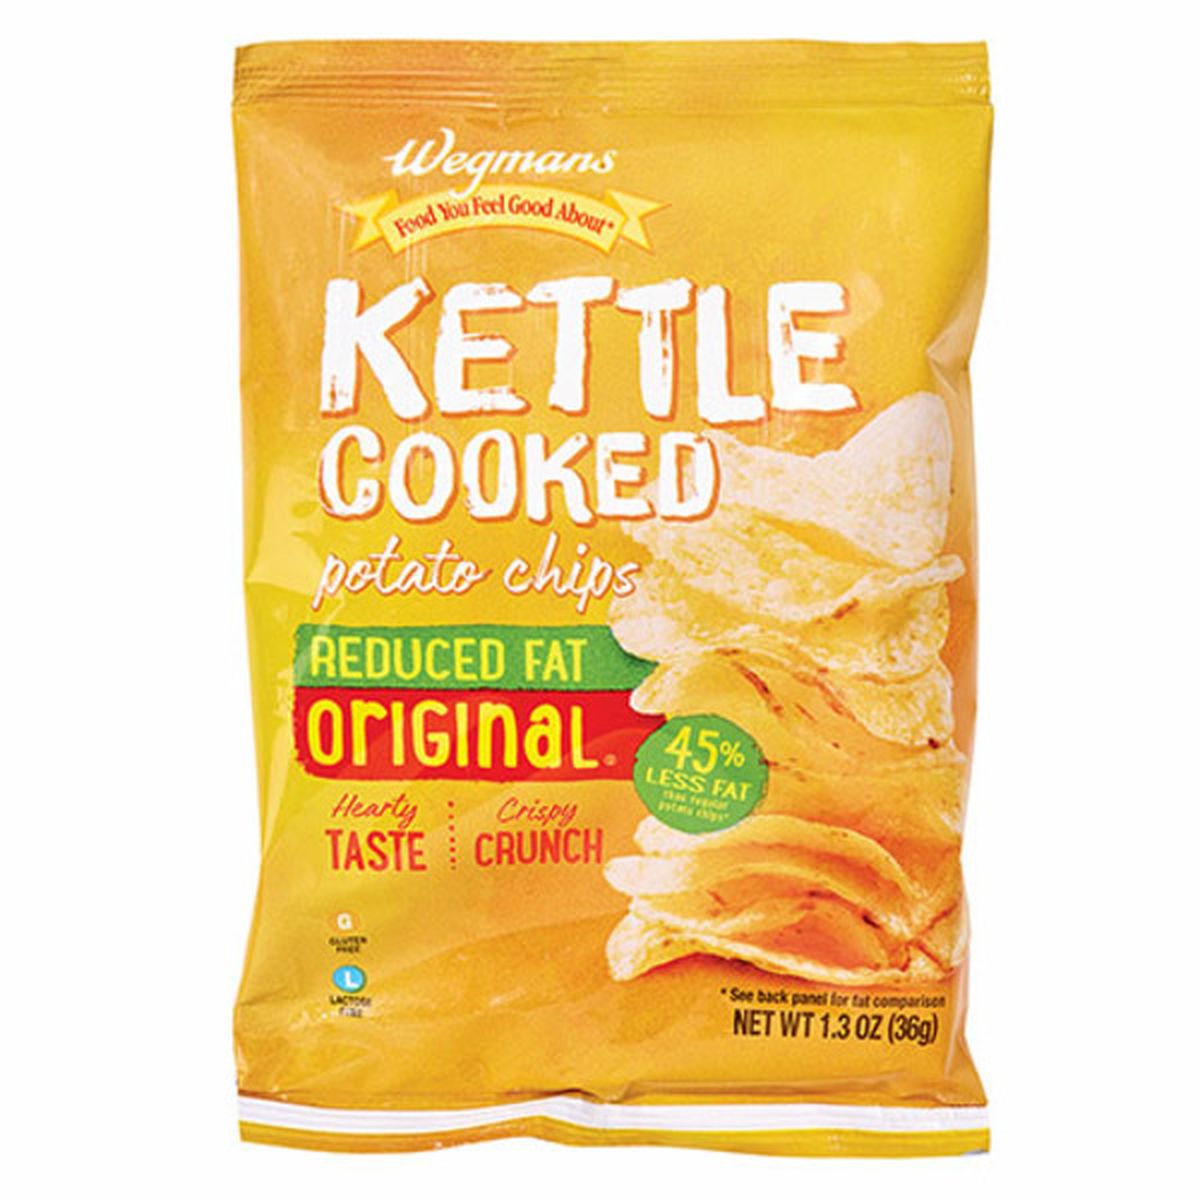 Calories in Wegmans Kettle Cooked Reduced Fat Original Potato Chips